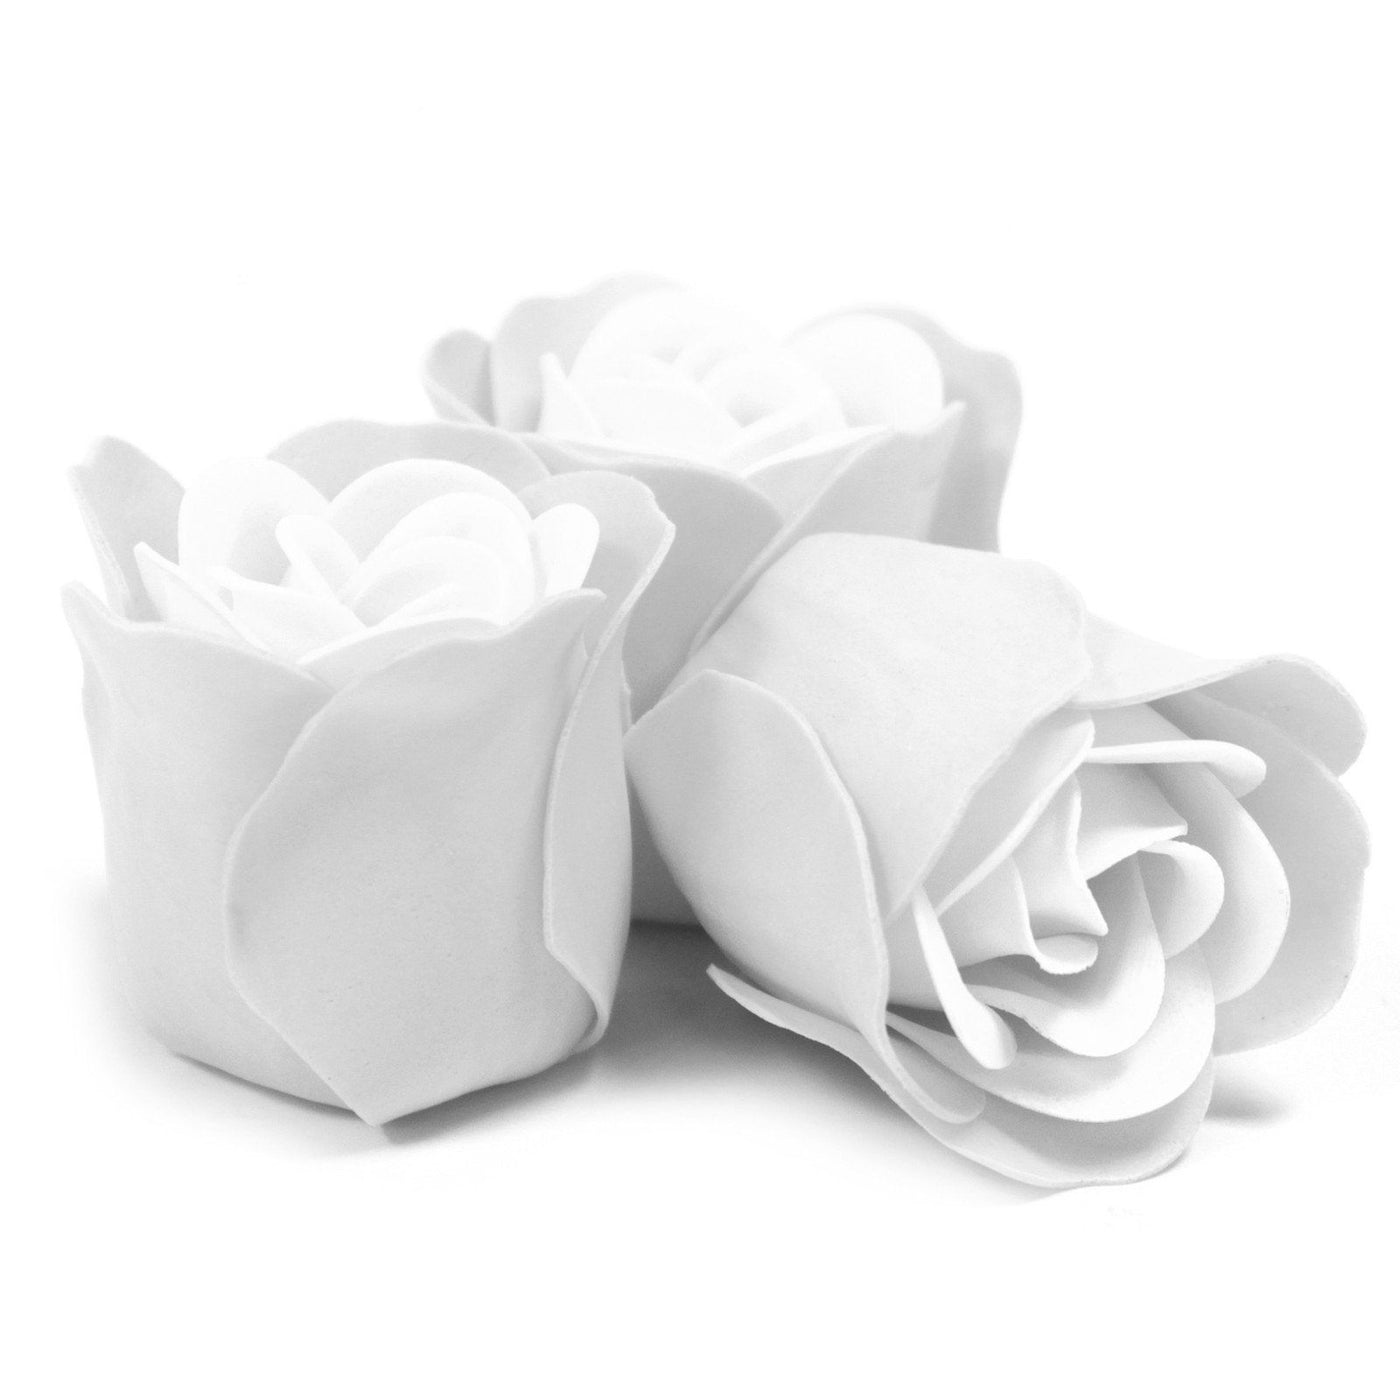 Set of 3 Luxury Soap Bath Flower Heart Box Gift - White.  A wonderful range of Luxury Soap Flowers. They are a perfect addition for a relaxing romantic bath, or you can even use individual petals as guest soaps. Beautifully packed these Soap Flowers are a perfect gift, wedding favours, Christmas stocking filler or just a little treat for yourself.   Just add one or two roses to your warm bath, relax, and watch the cute flowers dissolve right before your very eyes. 